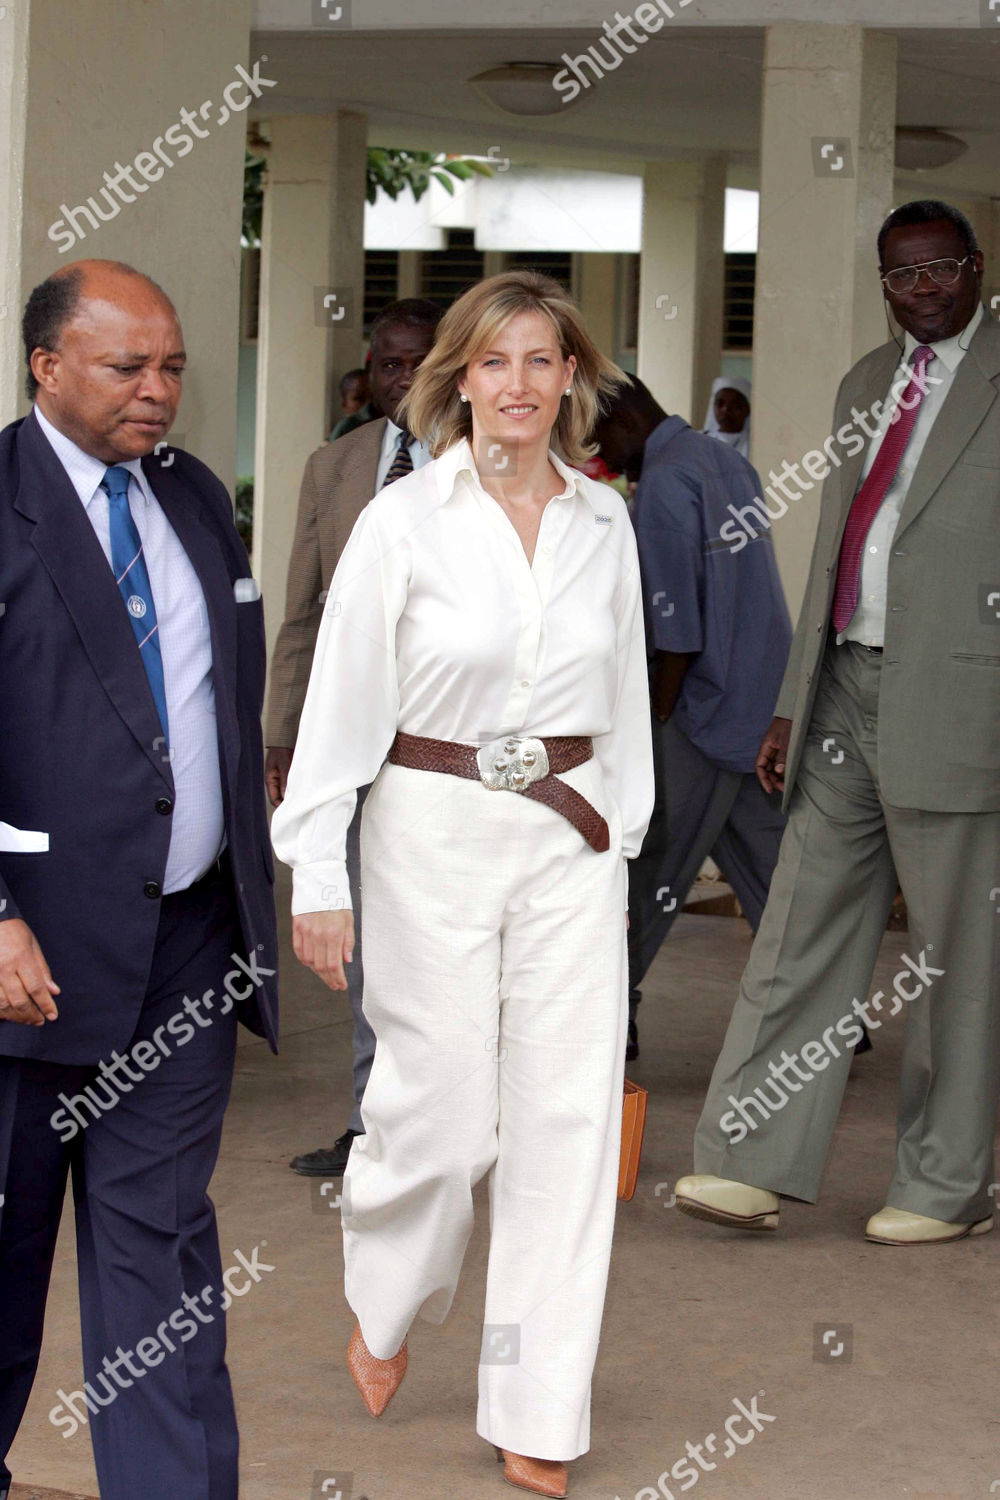 sophie-countess-of-wessex-visit-to-tanzania-with-vision-2020-the-right-to-sight-tanzania-shutterstock-editorial-459450d.jpg